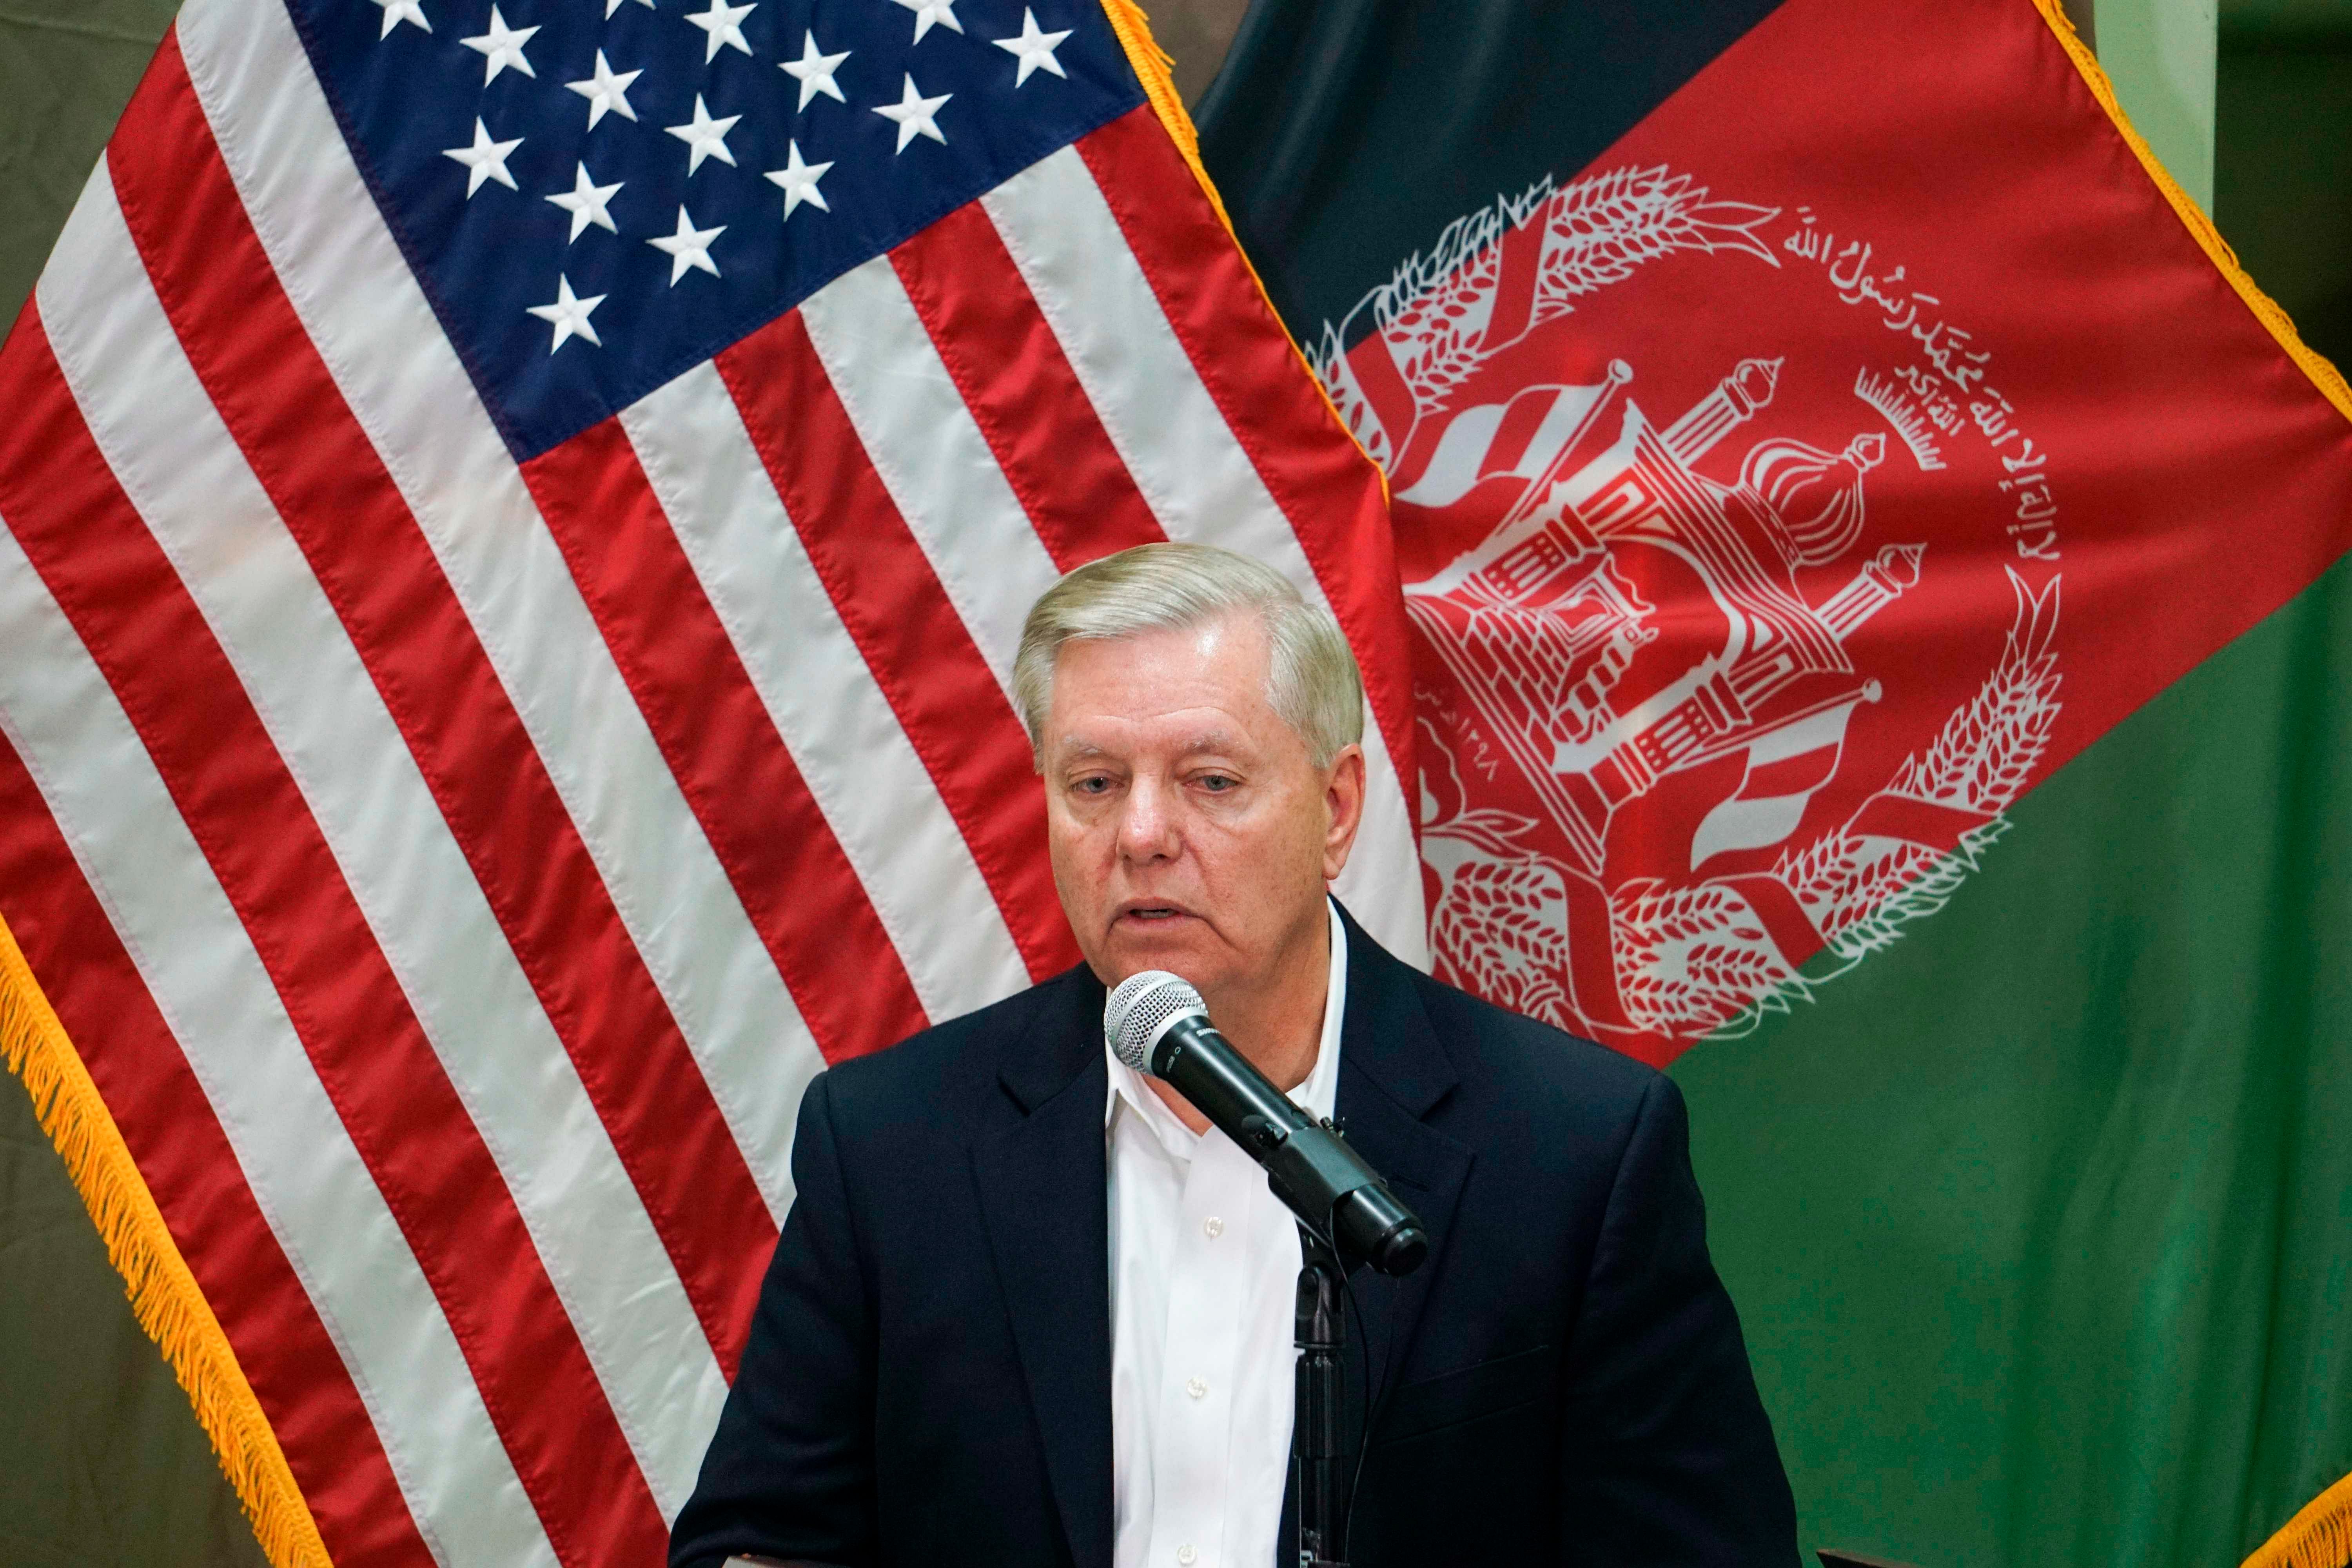 US Senator Lindsey Graham speaks during a press conference at the Resolute Support headquarters in Kabul. (AFP Photo)